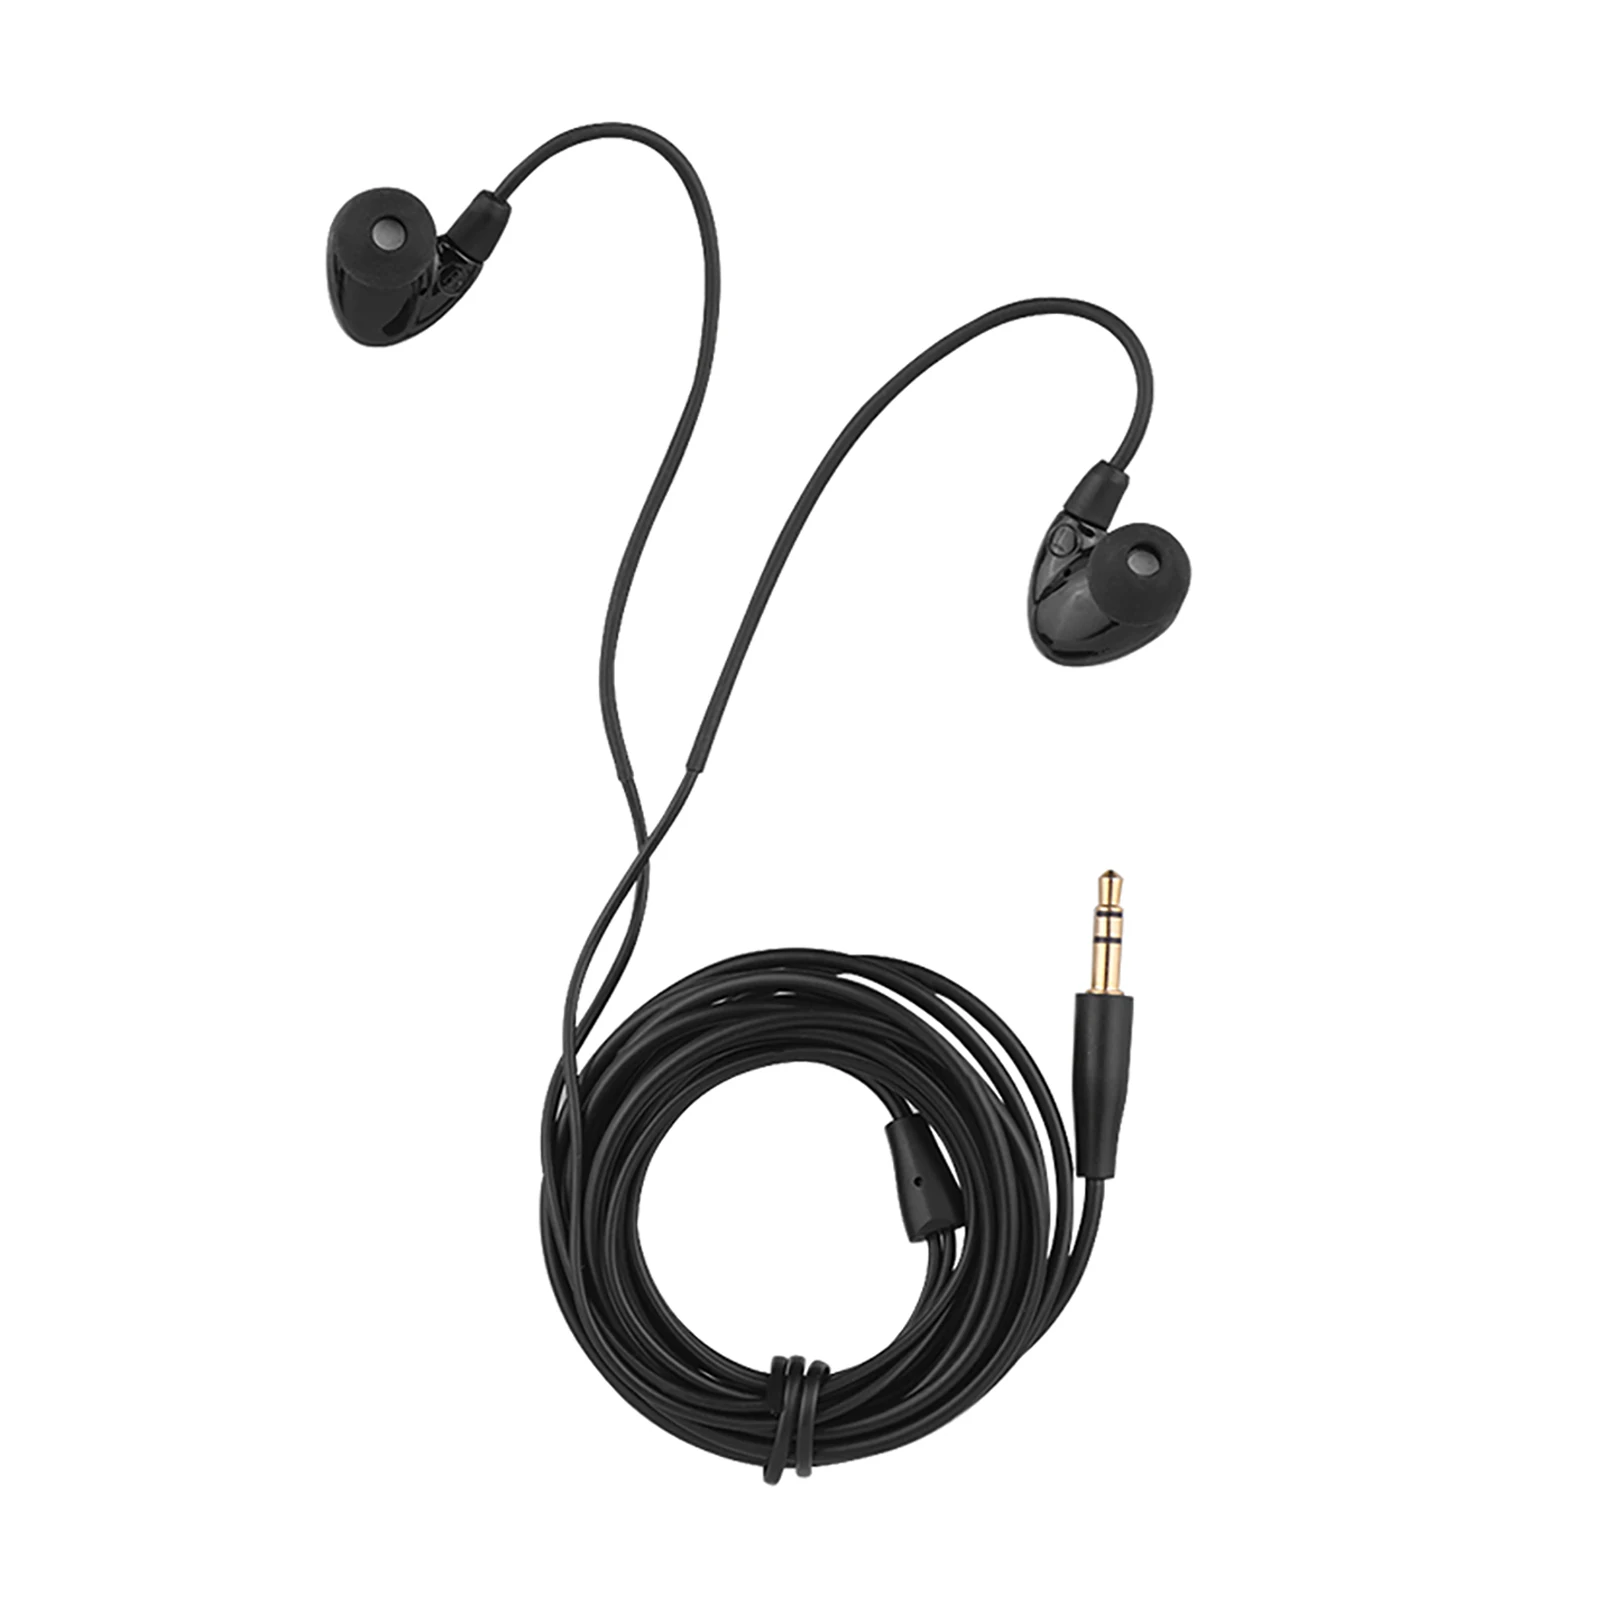 

TAKSTAR TS-2260 In Ear Headphones Wired Noise Cancelling Earbuds with 6.3mm Interface Adapter for Recording Monitoring Music